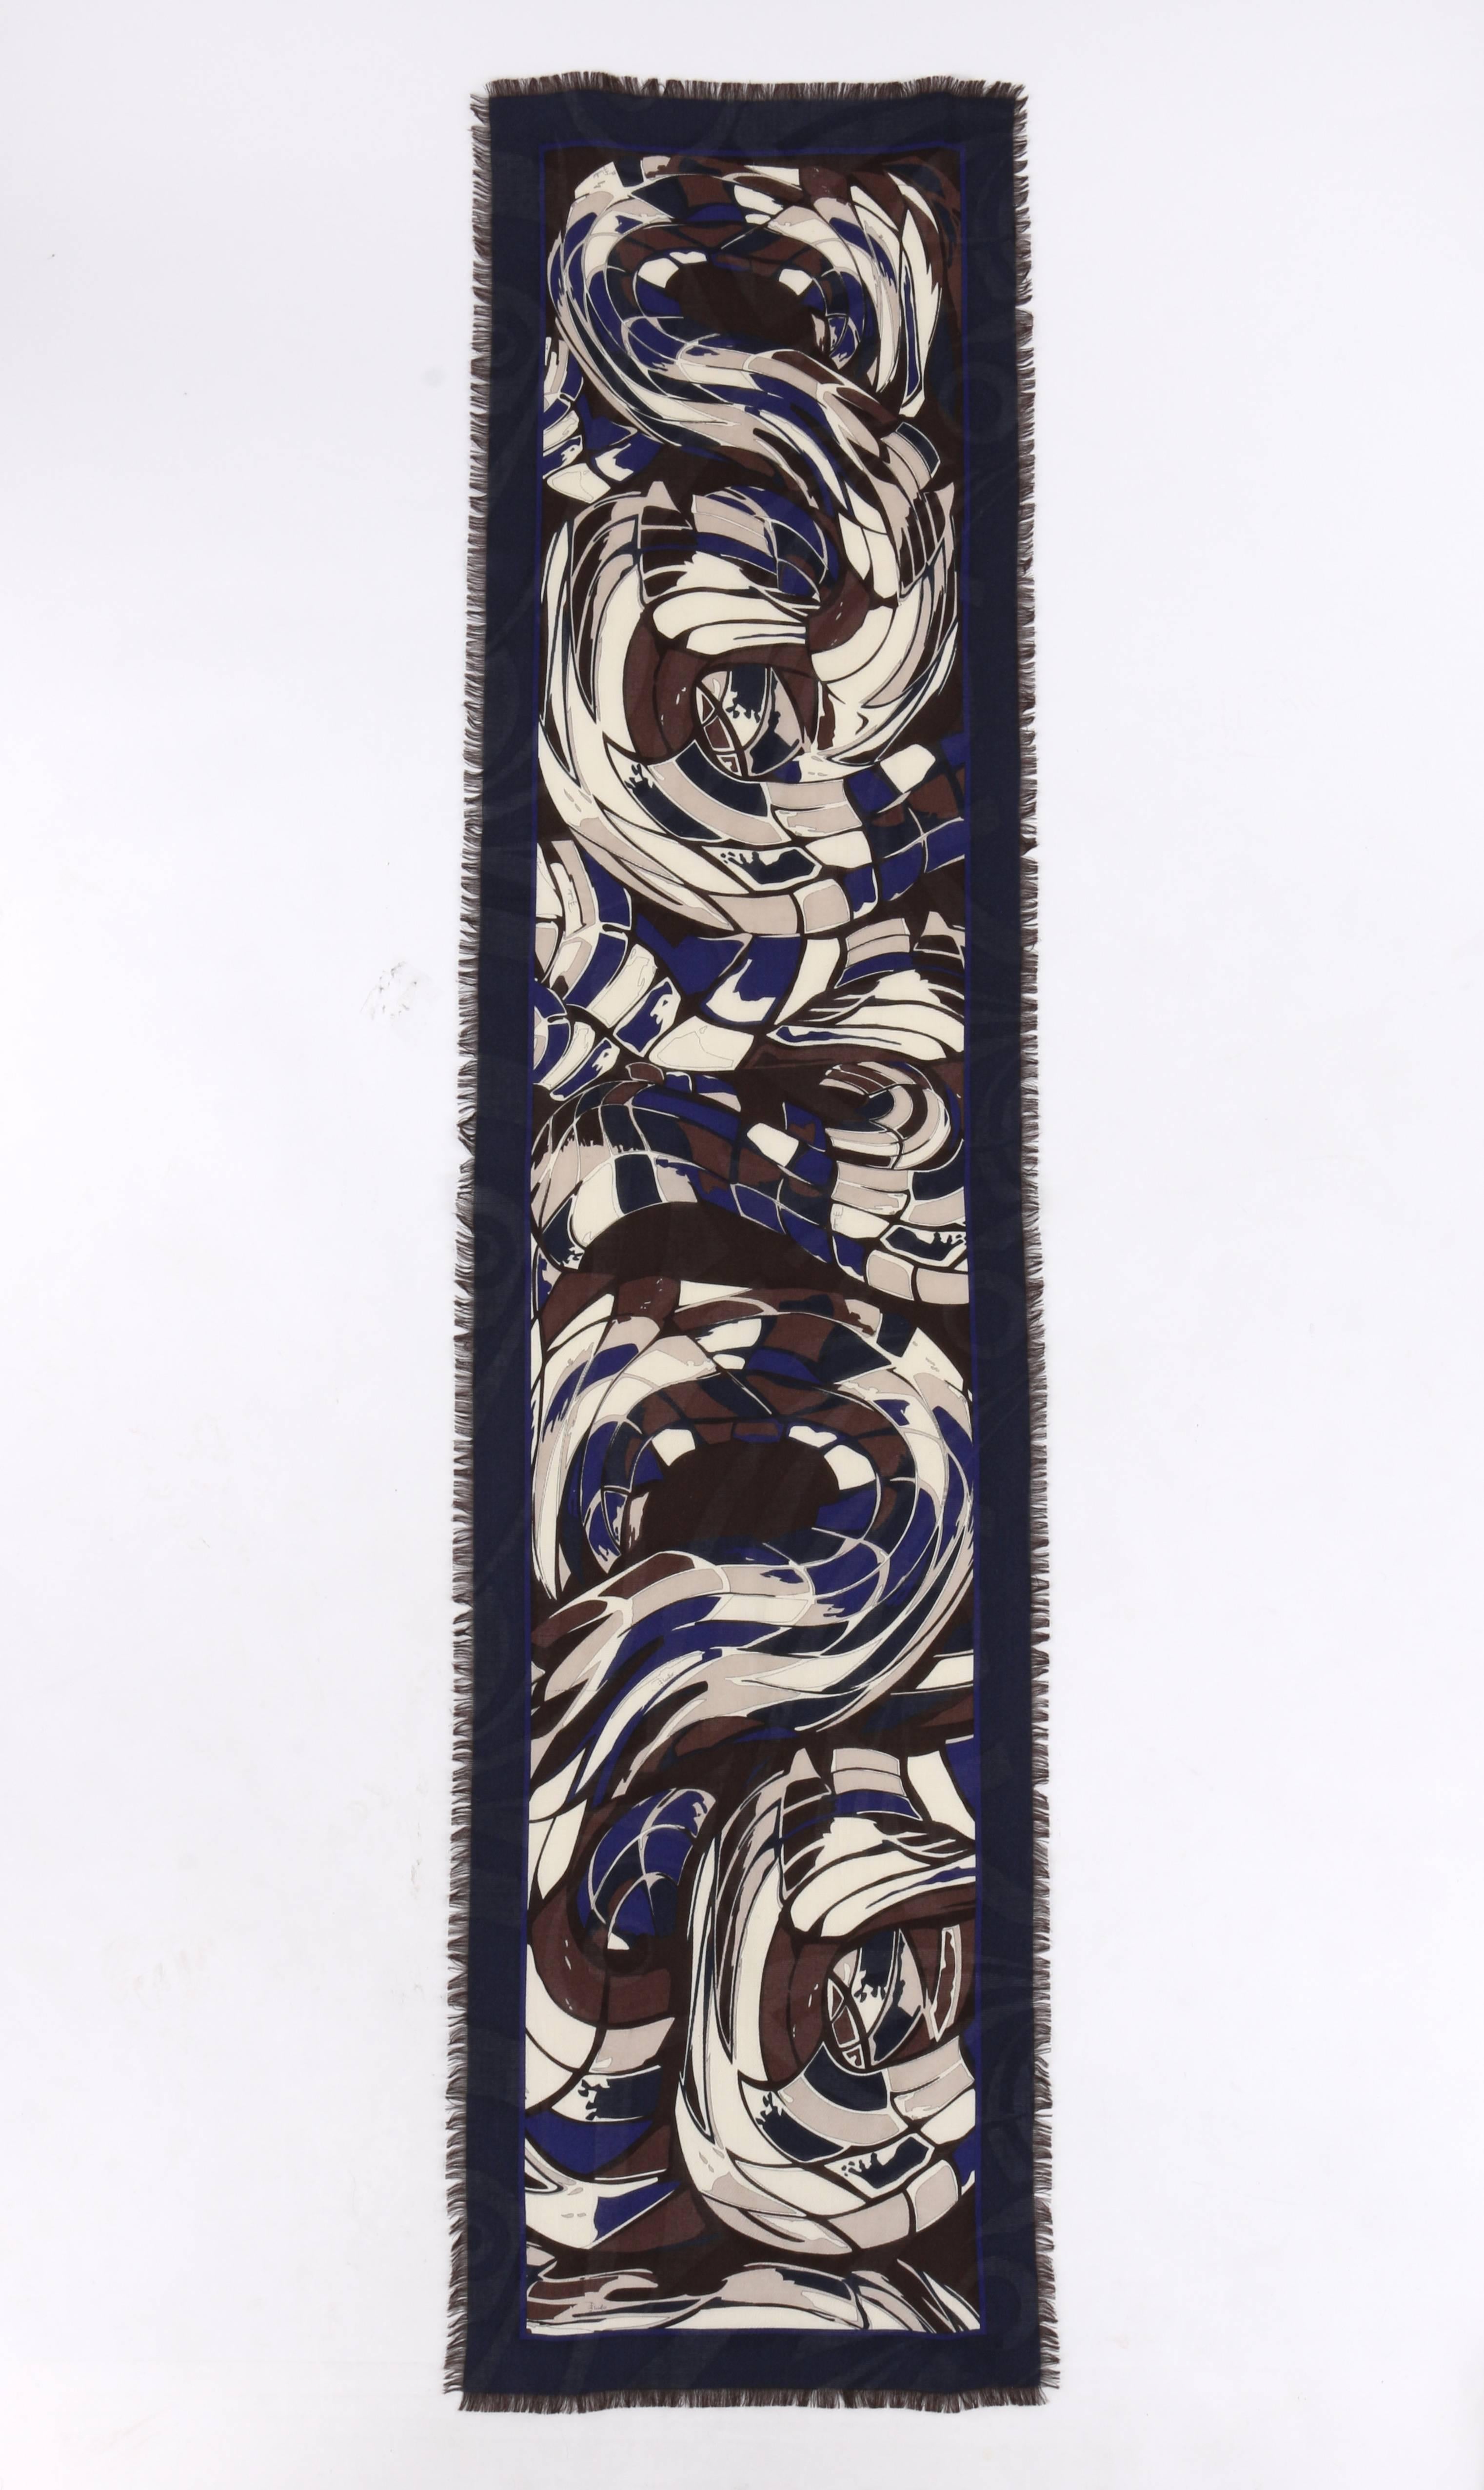 Emilio Pucci wool and silk blend oblong scarf. Multicolor abstract signature print in shades of blue, brown, cream, and black. Raw fringe edge. Oblong shape. Unmarked Fabric Content: Wool / Silk blend. Measurements:

Length: 68.5" (excluding